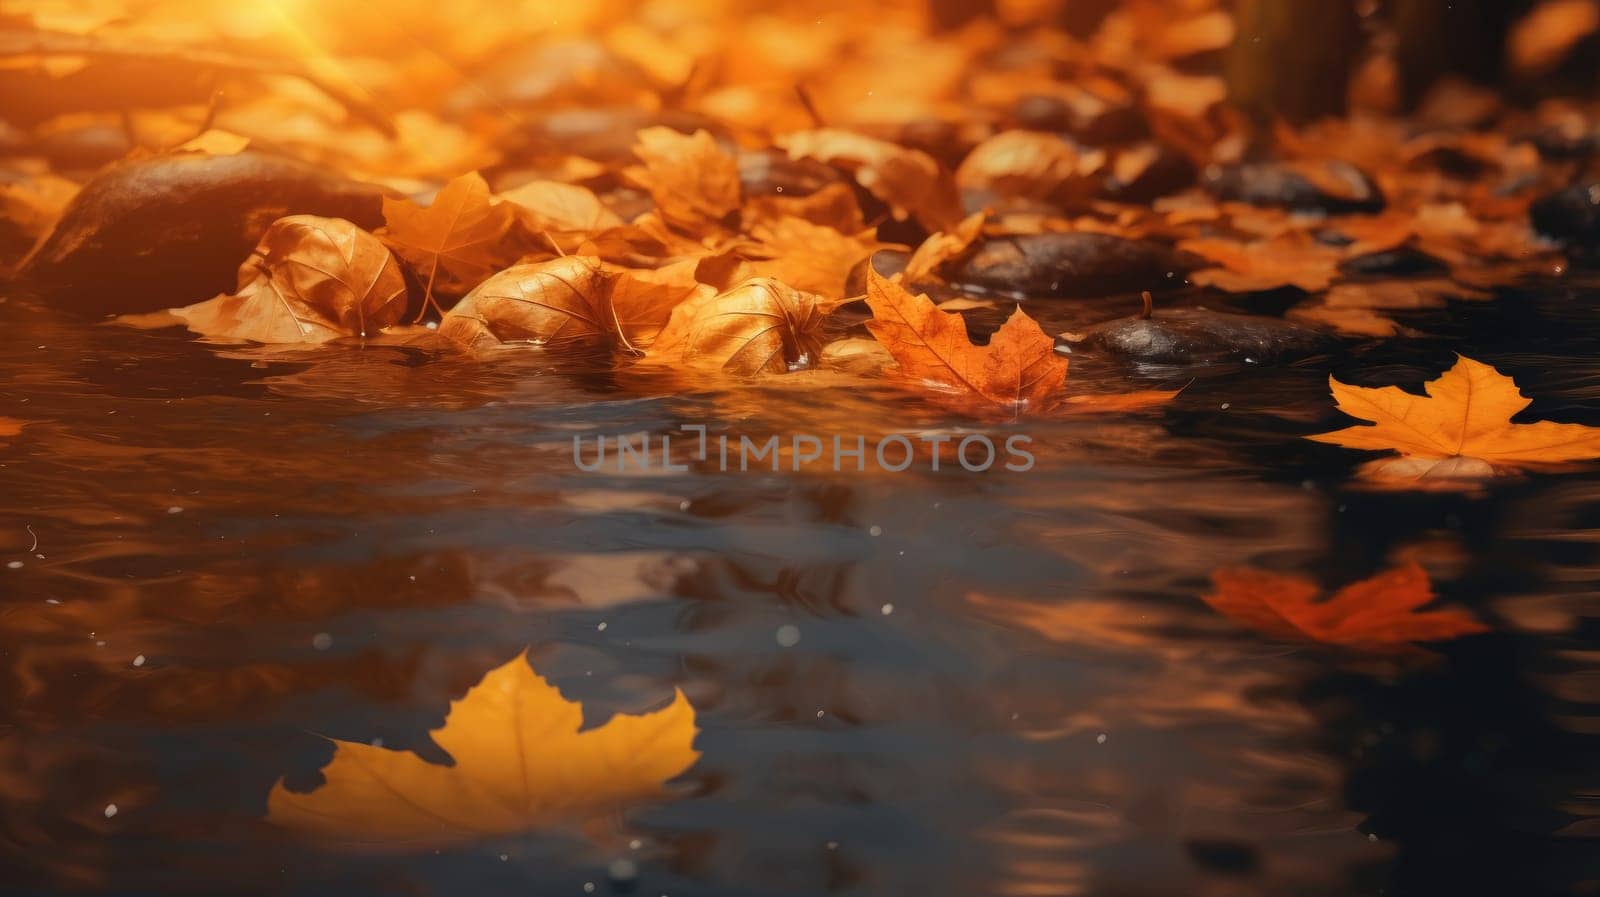 Autumn yellow leaves on the ground. Beautiful background for your design